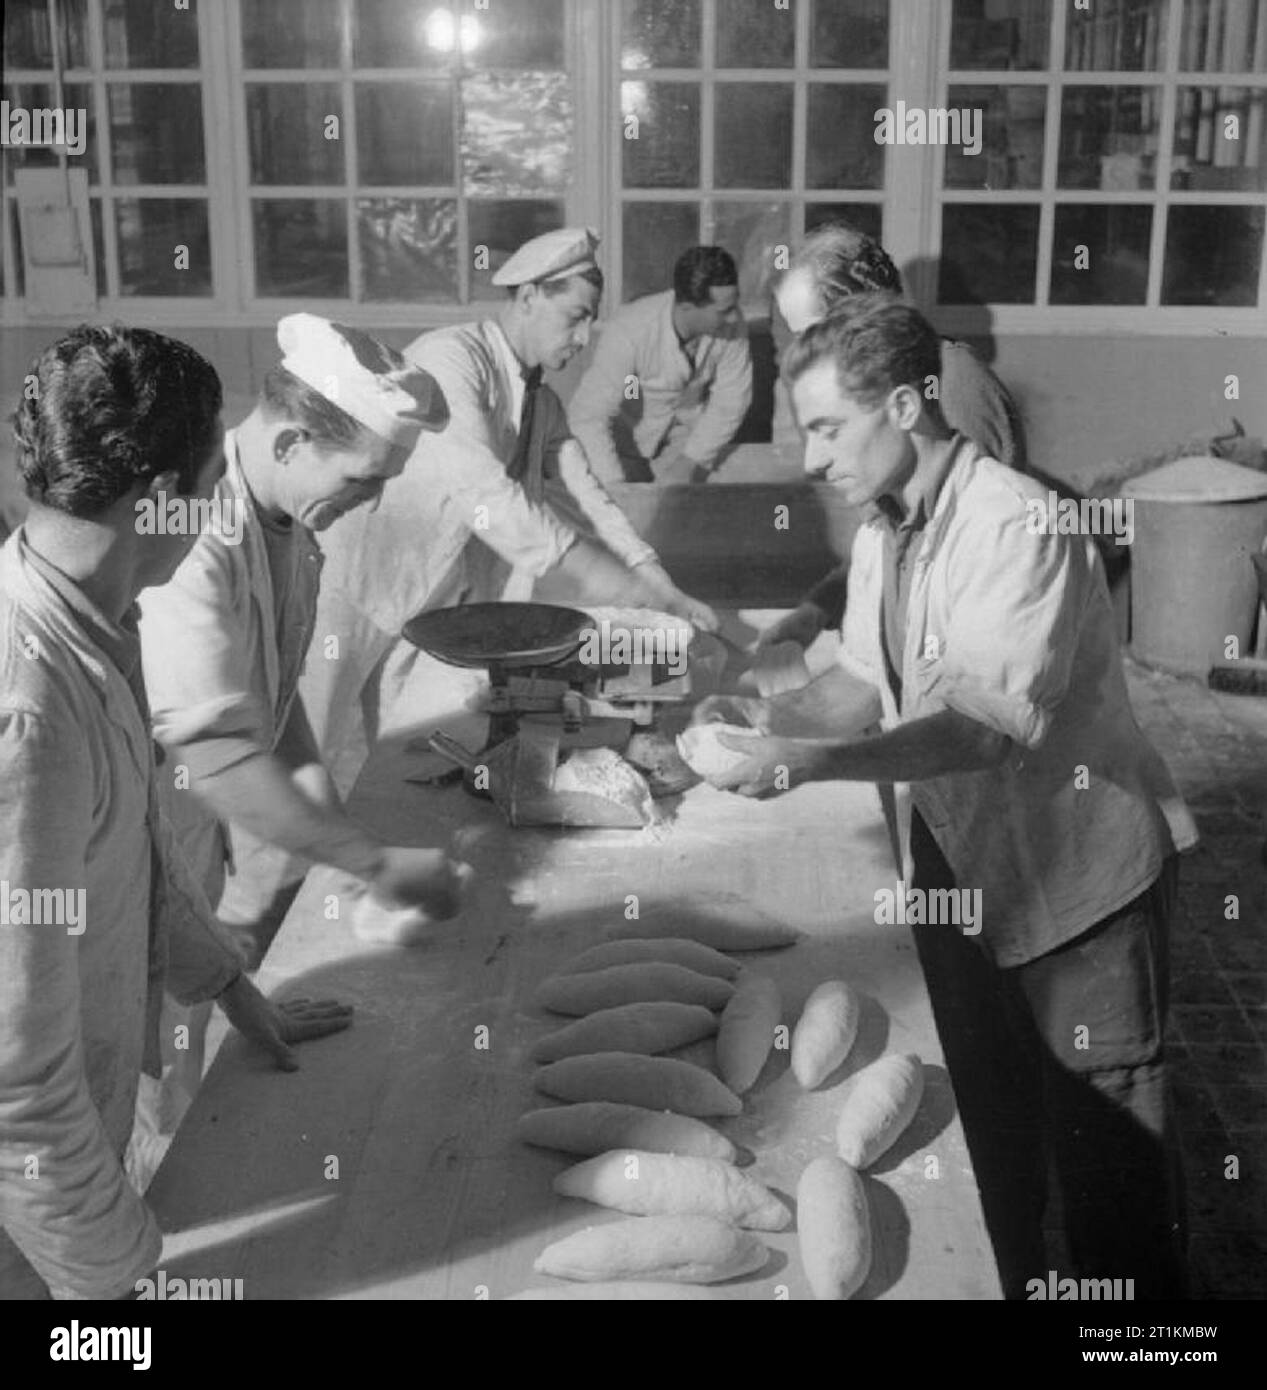 Italian Prisoners of War in Britain- Everyday Life at An Italian Pow Camp, England, UK, 1945 Bakers shape loaves of bread in the bakery of the N.144 Italian workers camp near London. The men are Bacchisio Bellu, Salvatore Mura, Mario Raimondis, Rosario Di Stefano and Antonio Annicchiarico. Stock Photo